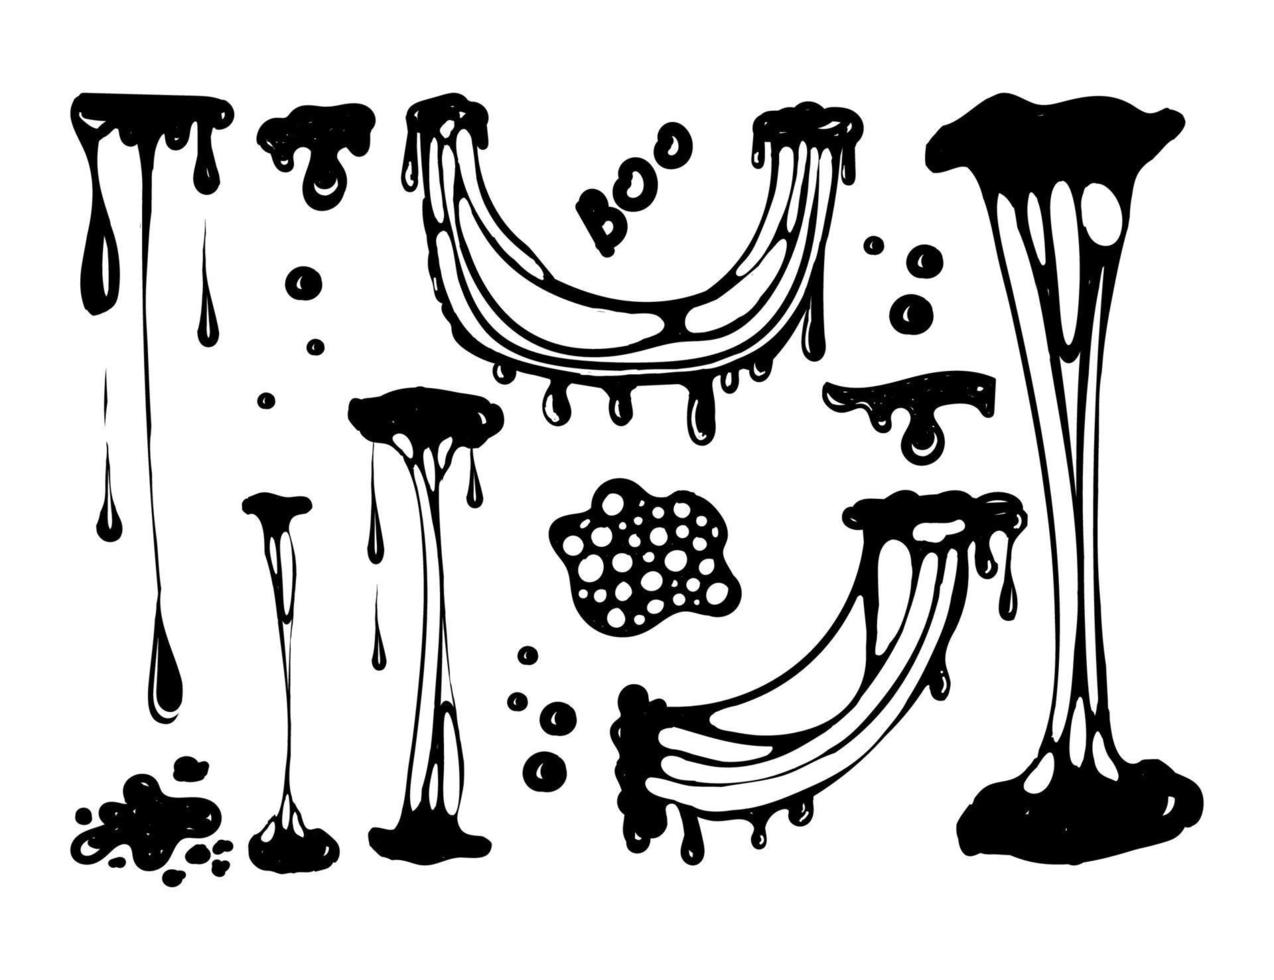 A set for working with blobs. Doodle style drawn elements. Black splashes of slime, stretching slime, toxic dripping slime. Slime splatter and droplets, liquid borders. Isolated vector shapes